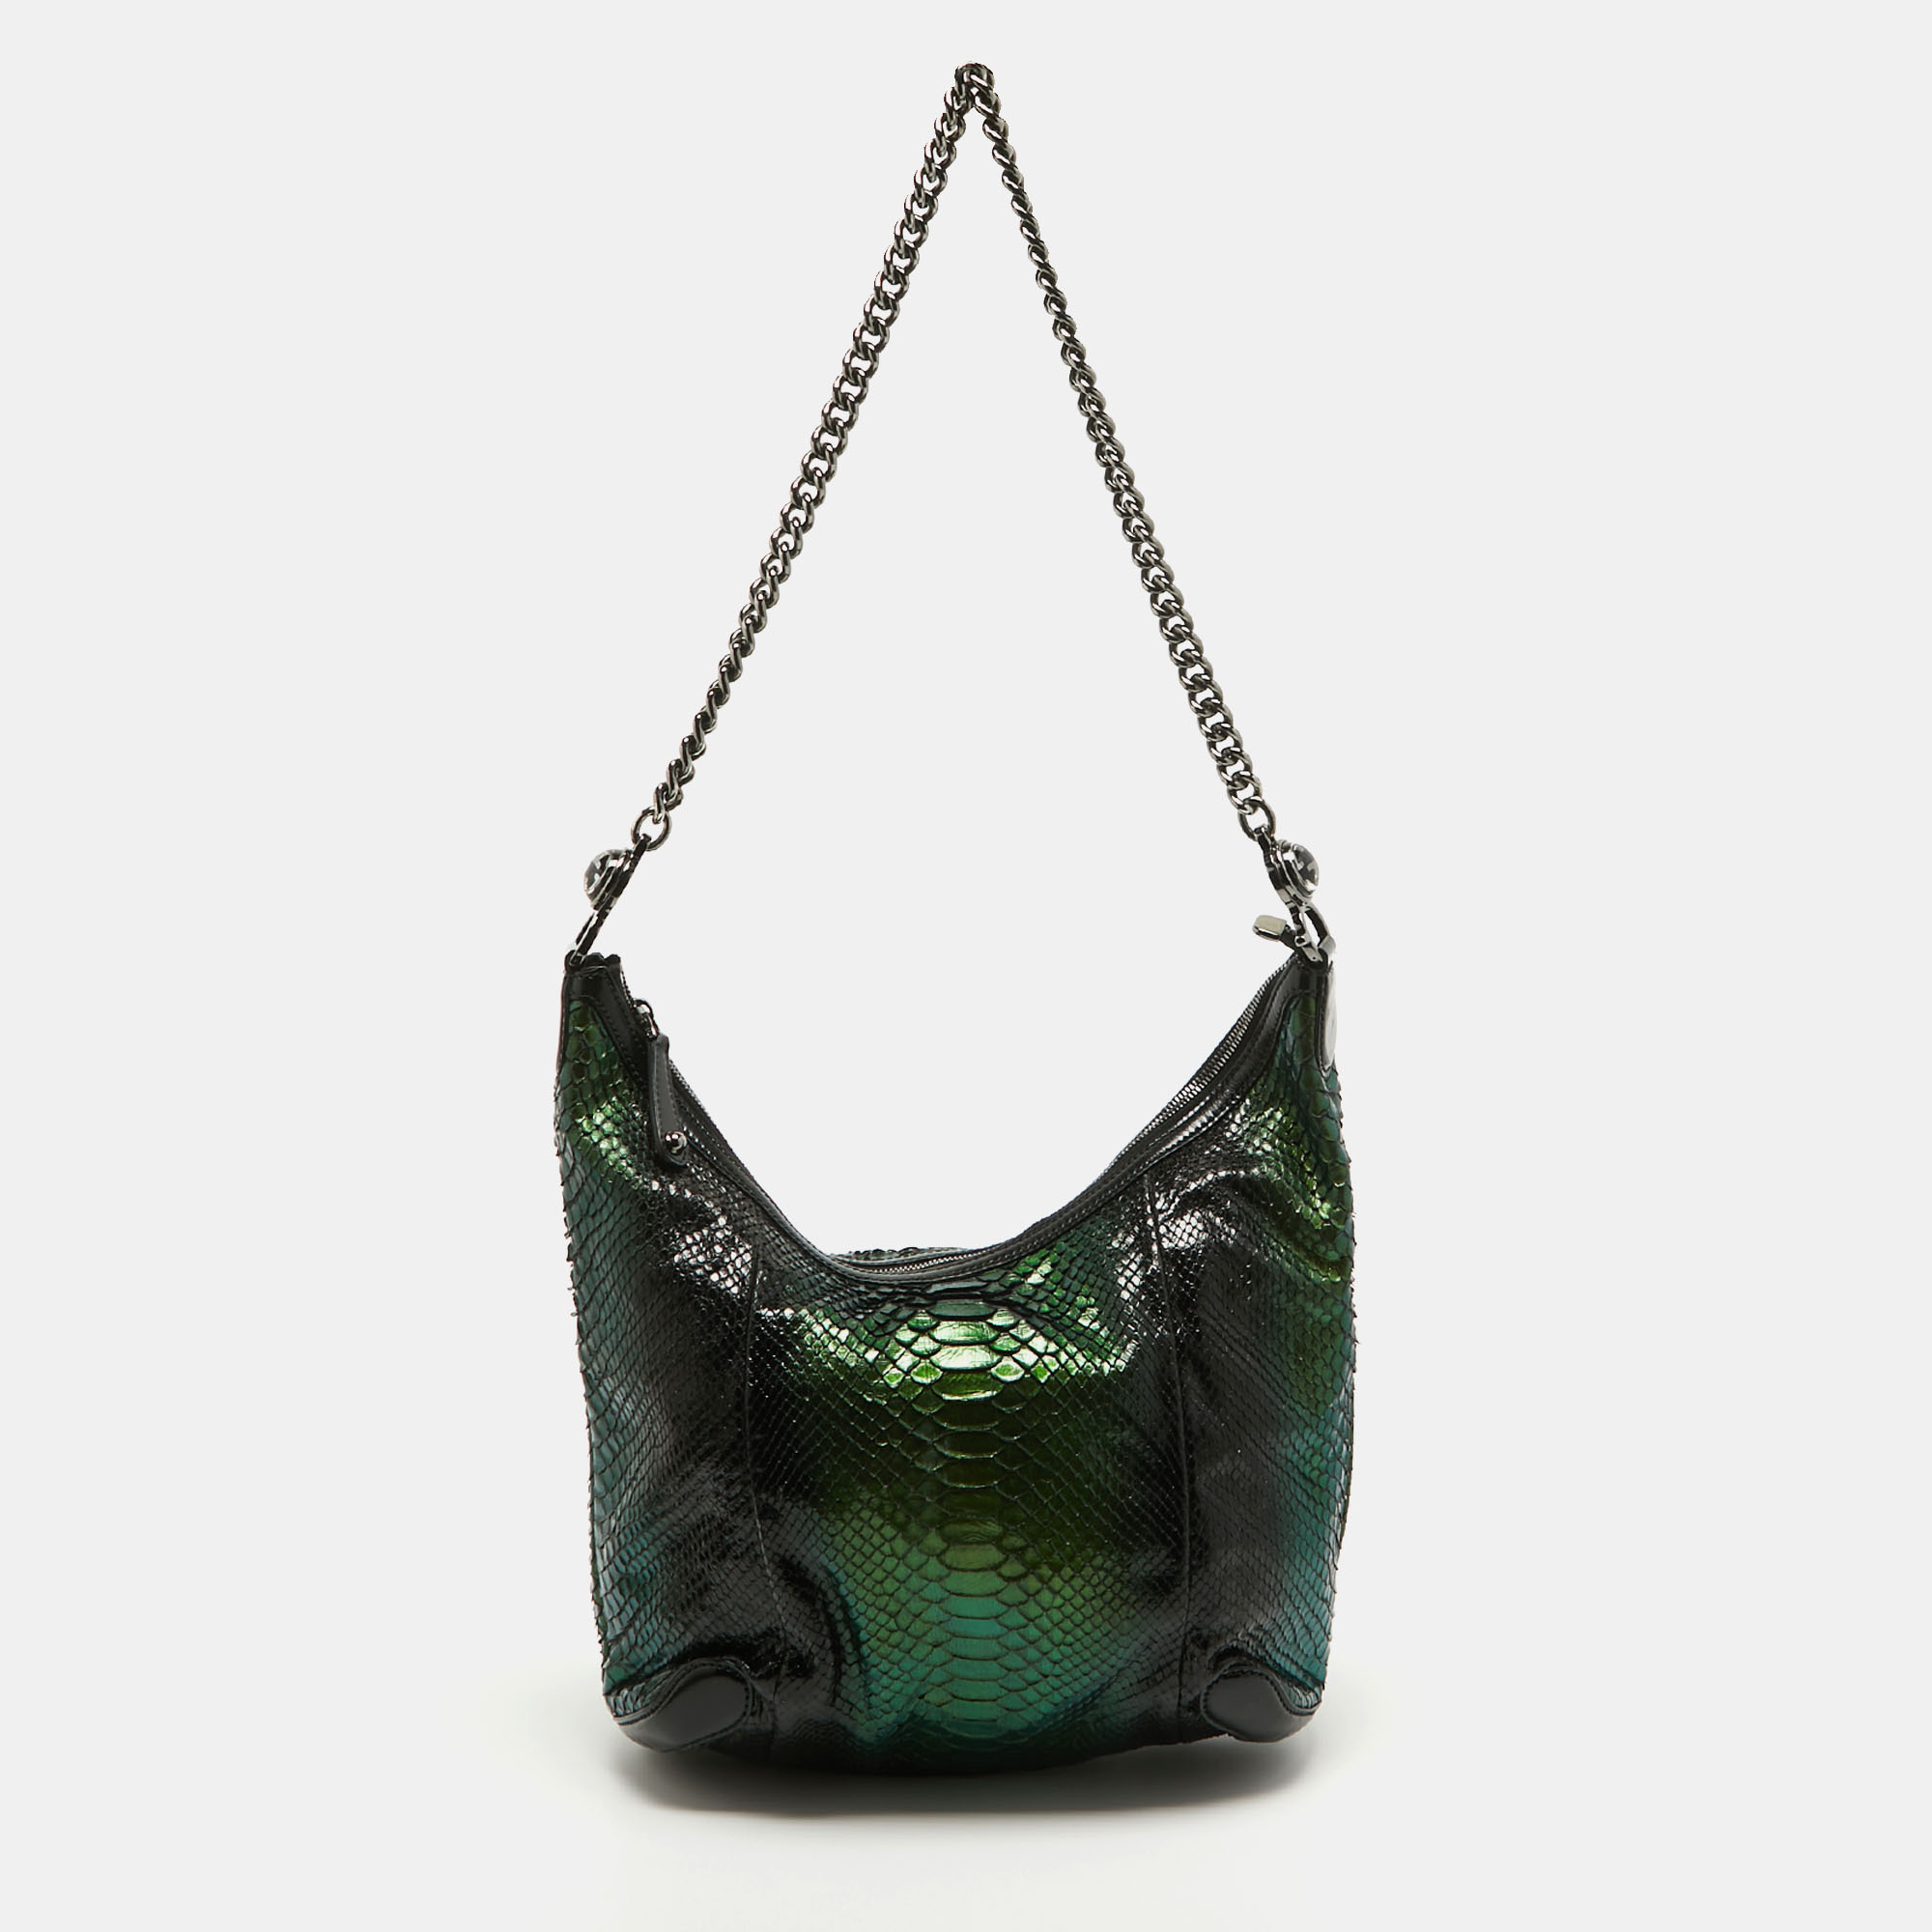 This Gucci hobo is a result of blending high crafting skills with a practical design. It arrives with a durable exterior completed by luxe detailing. It is an accessory that you can count on.